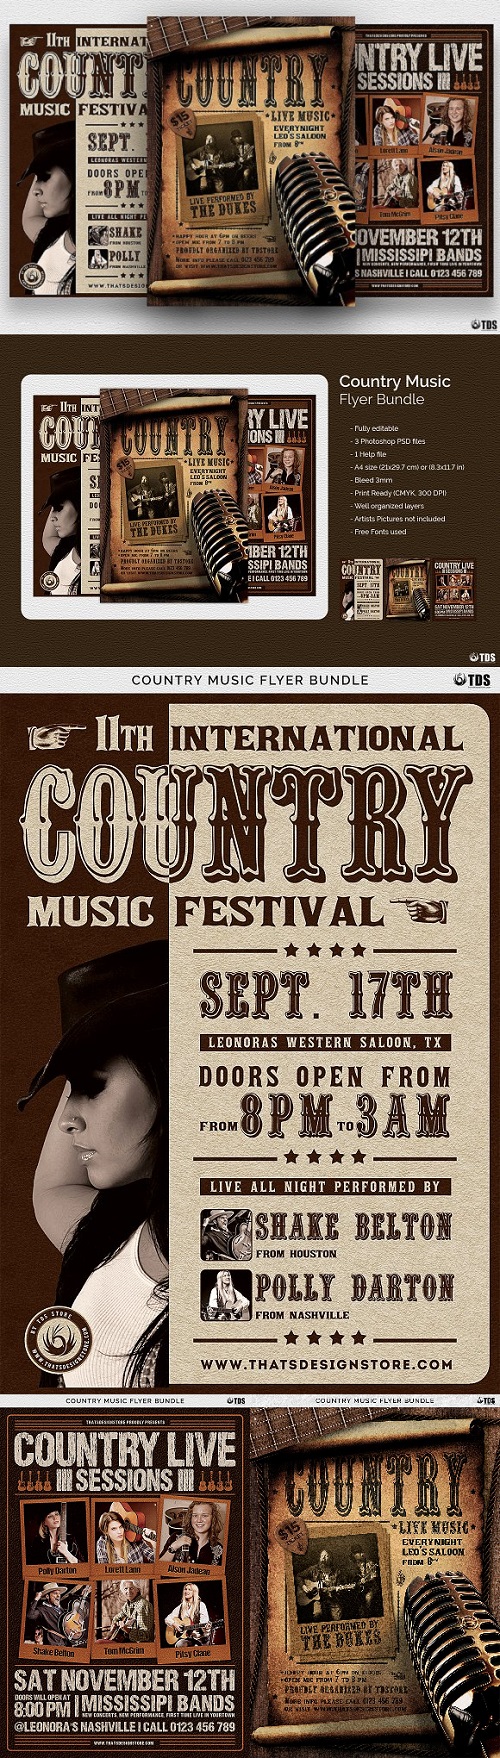 Country Music Flyer Bundle 2081052